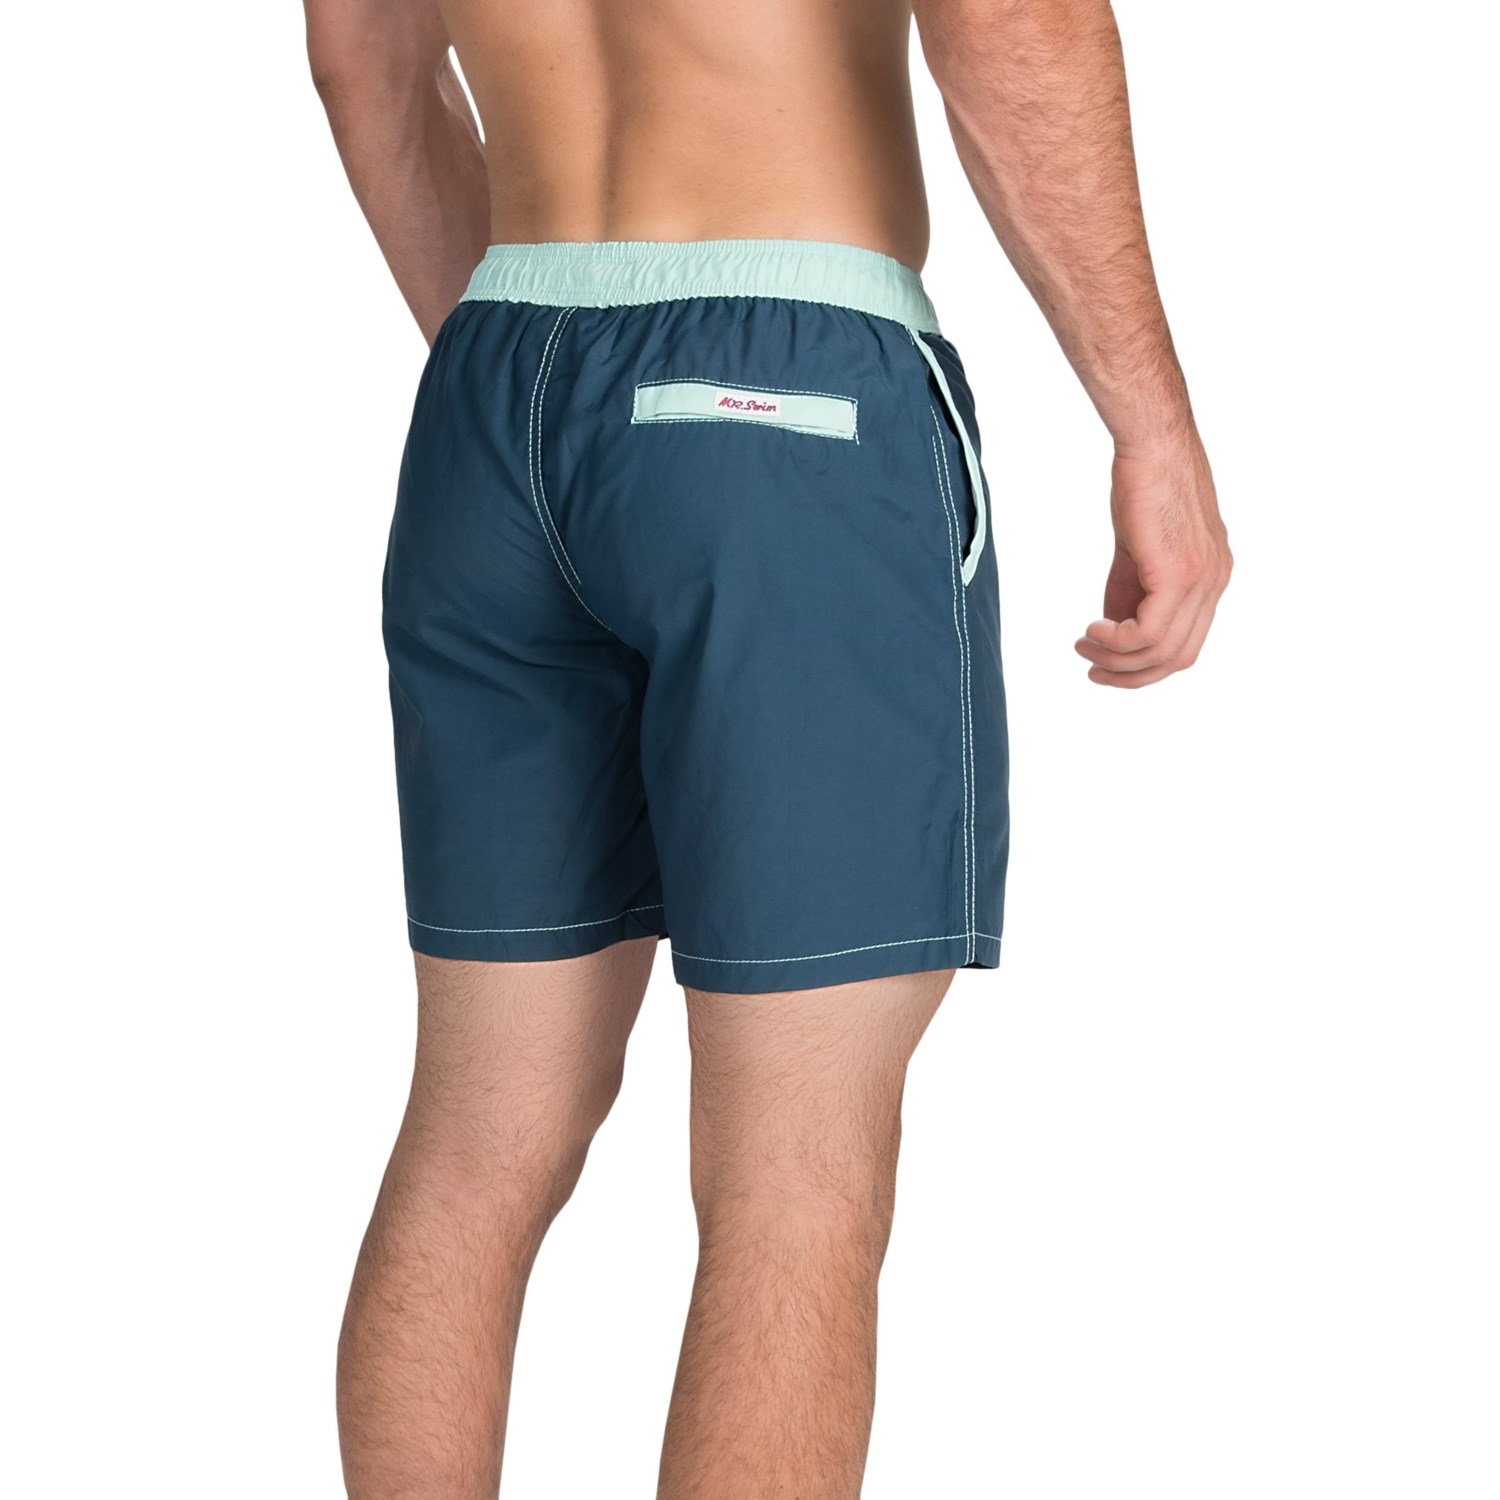 s swim shorts with built in brief